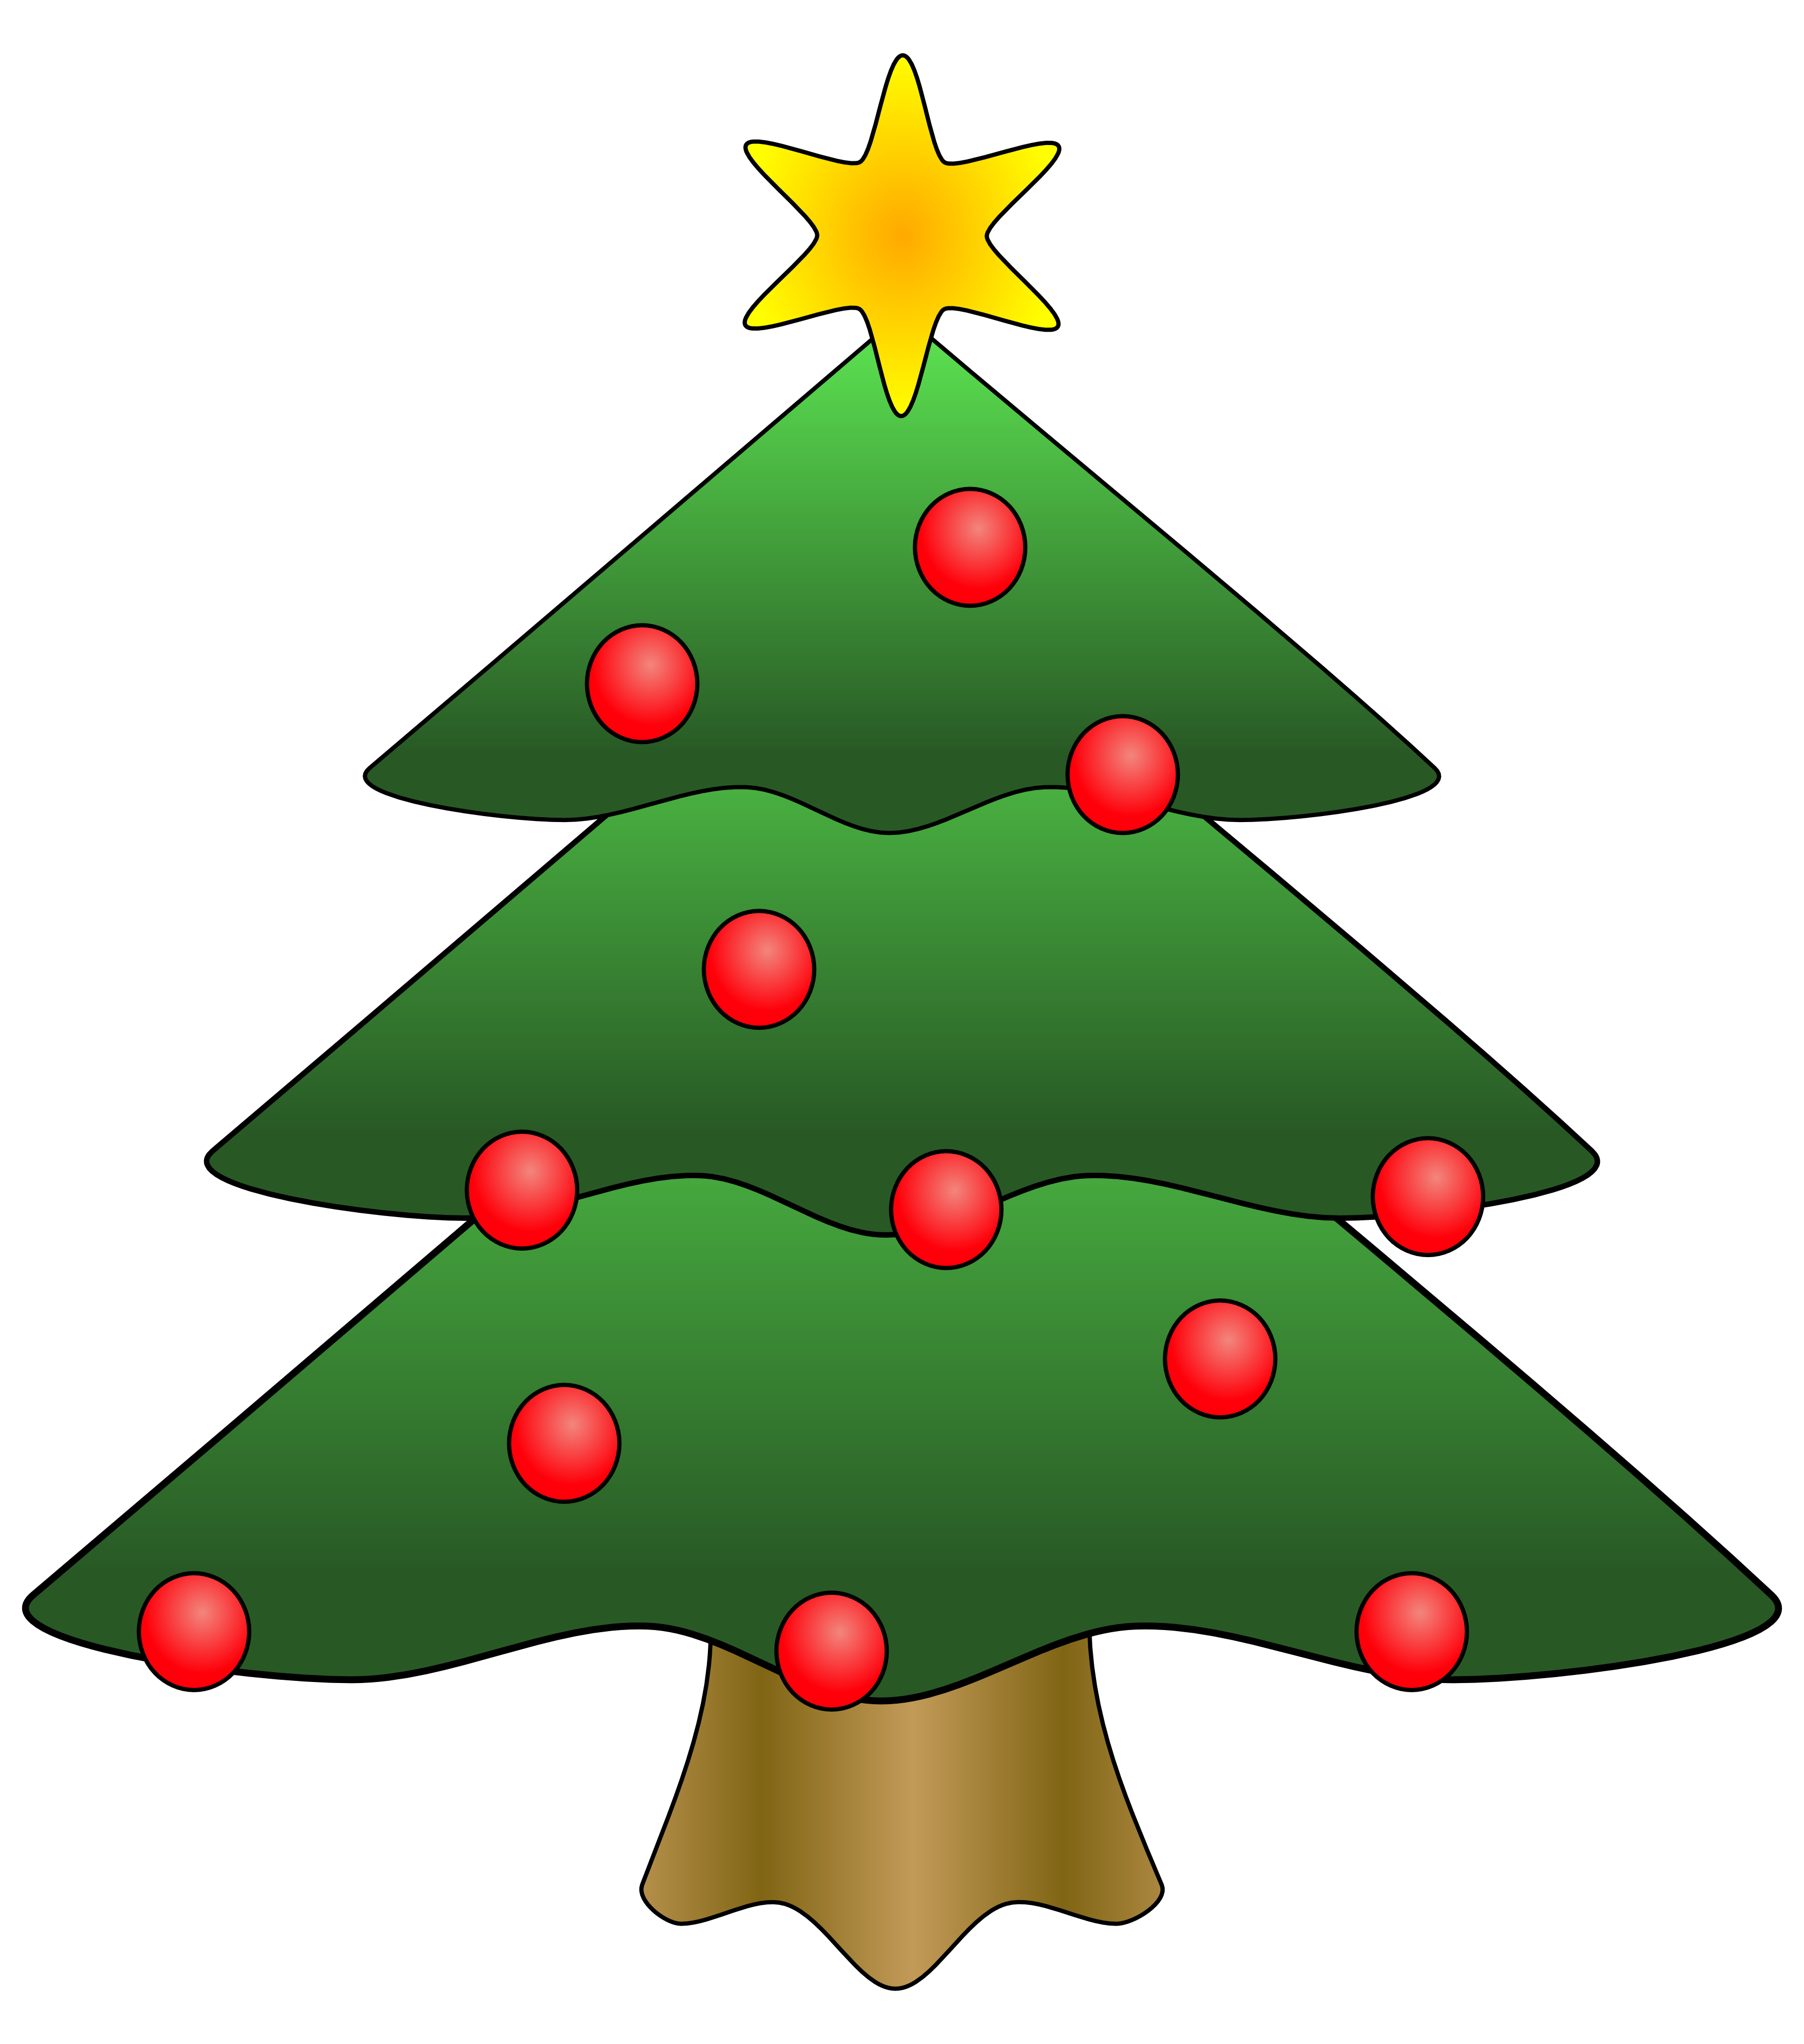 Clipart Christmas Tree With Presents   Clipart Panda   Free Clipart